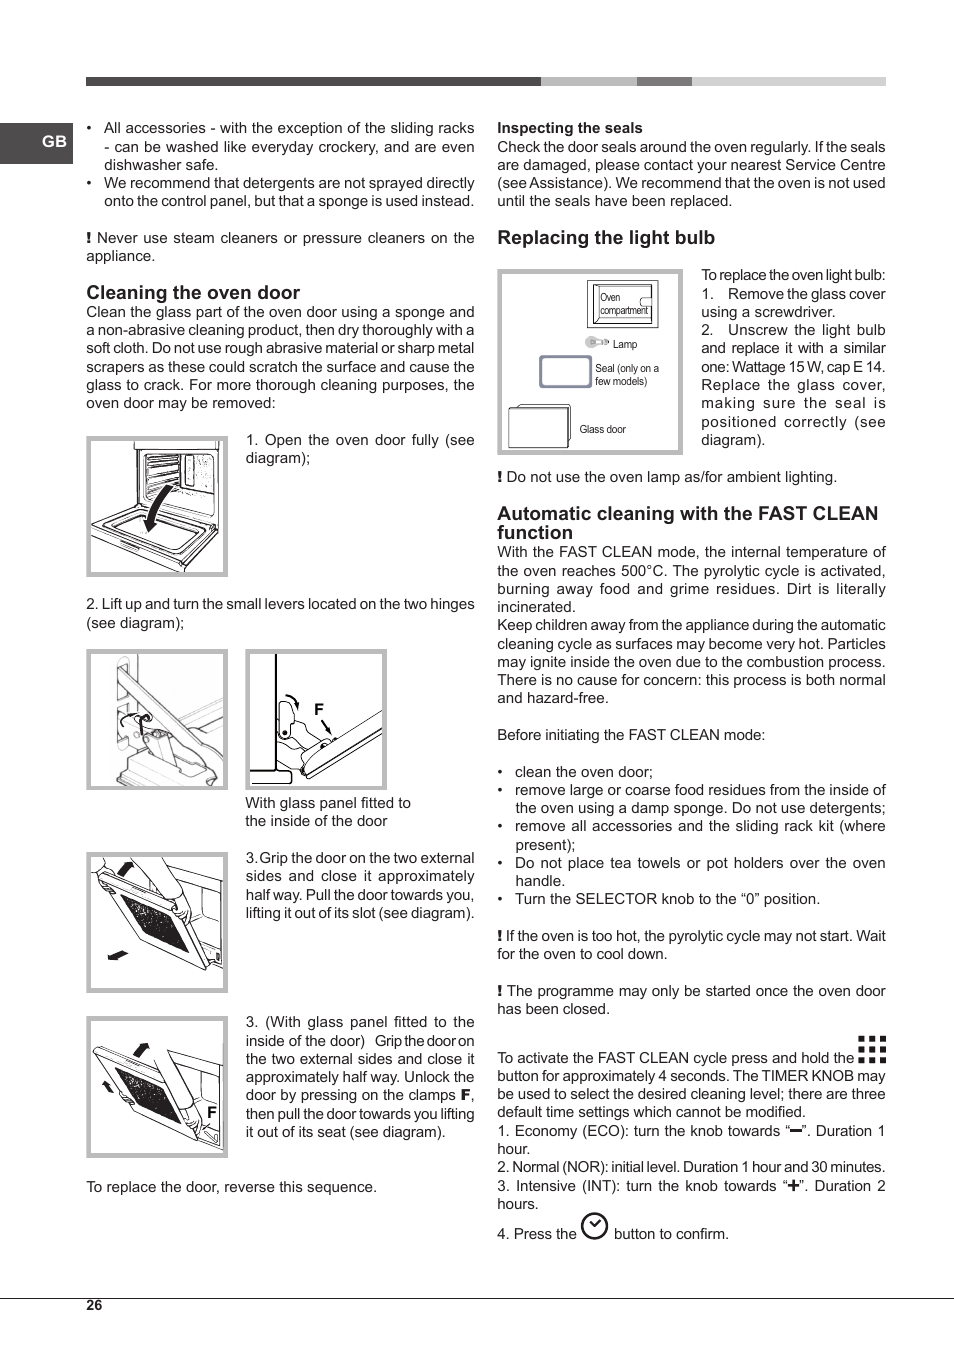 Cleaning the oven door, Replacing the light bulb, Automatic cleaning with  the fast clean function | Hotpoint Ariston Style FH 89 P IX-HA S User  Manual | Page 26 / 56 | Original mode